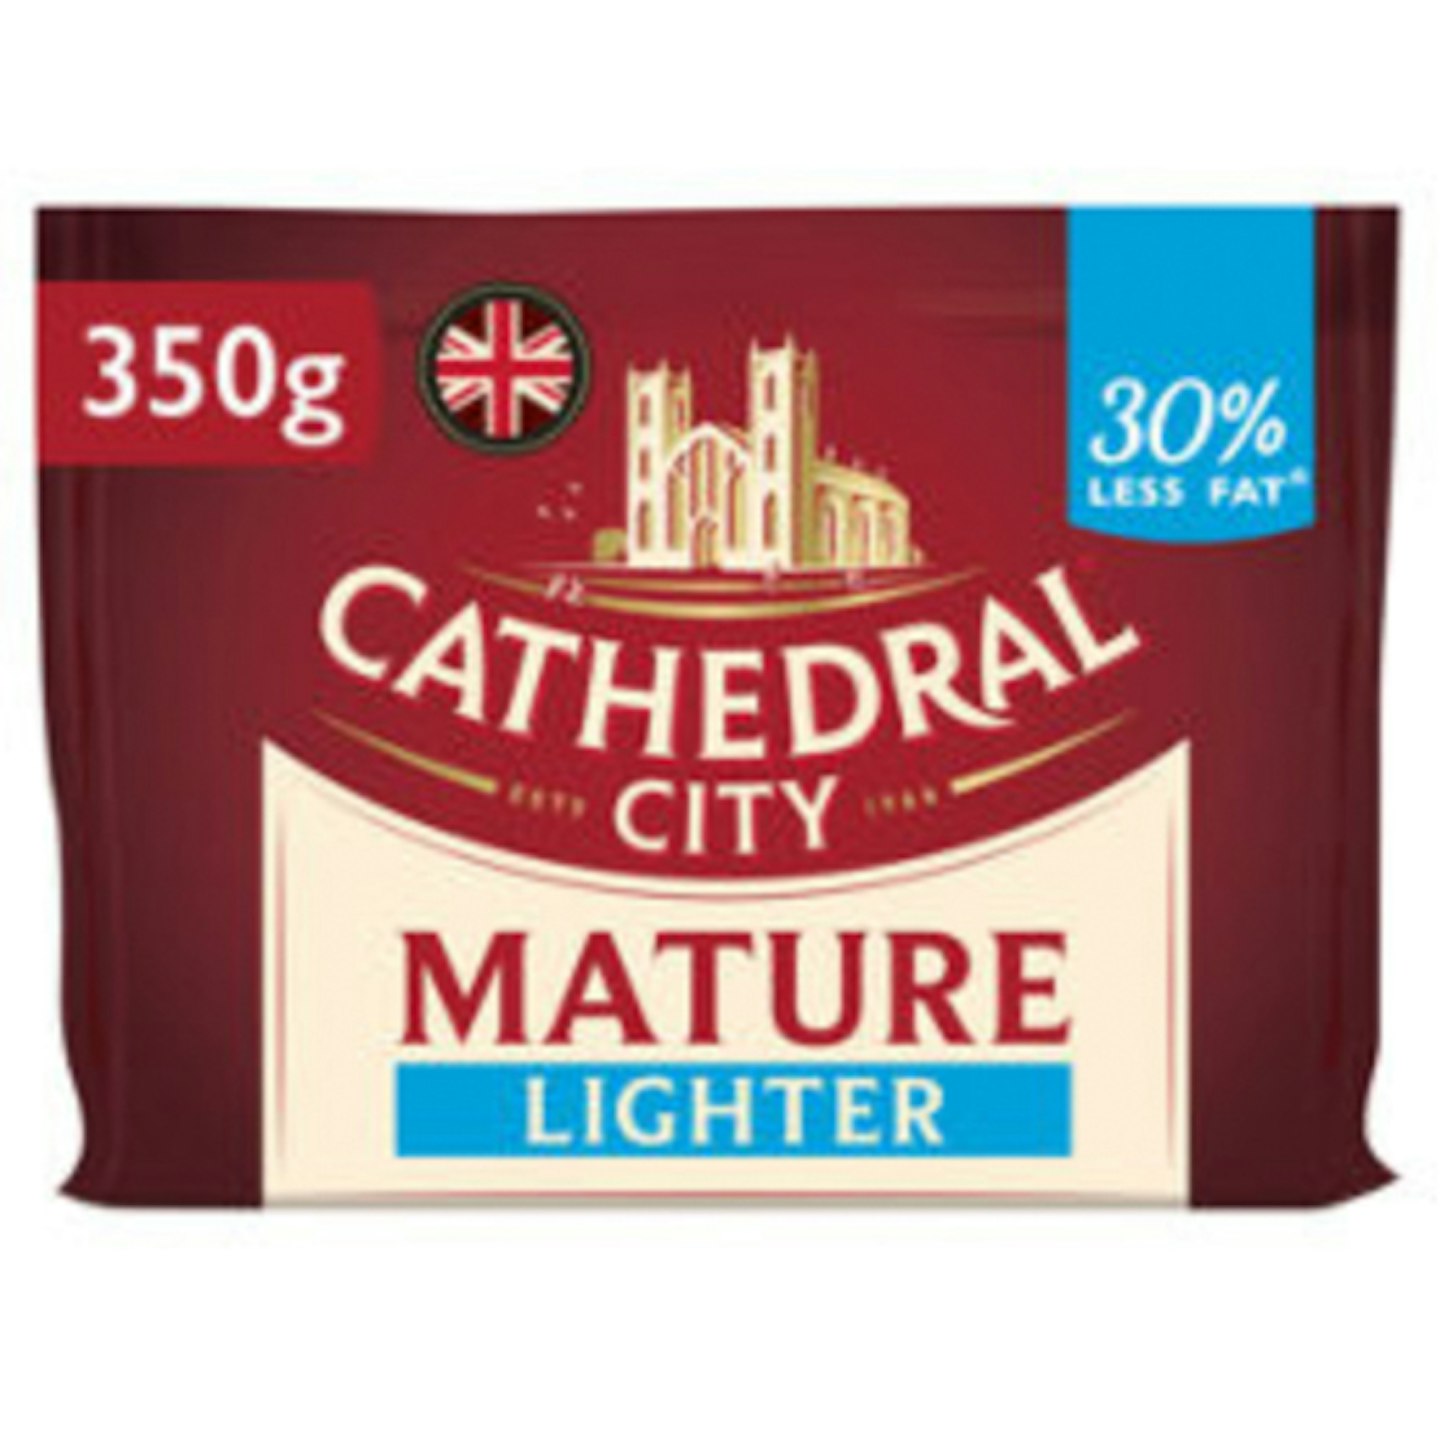 Cathedral City Mature Lighter Cheese